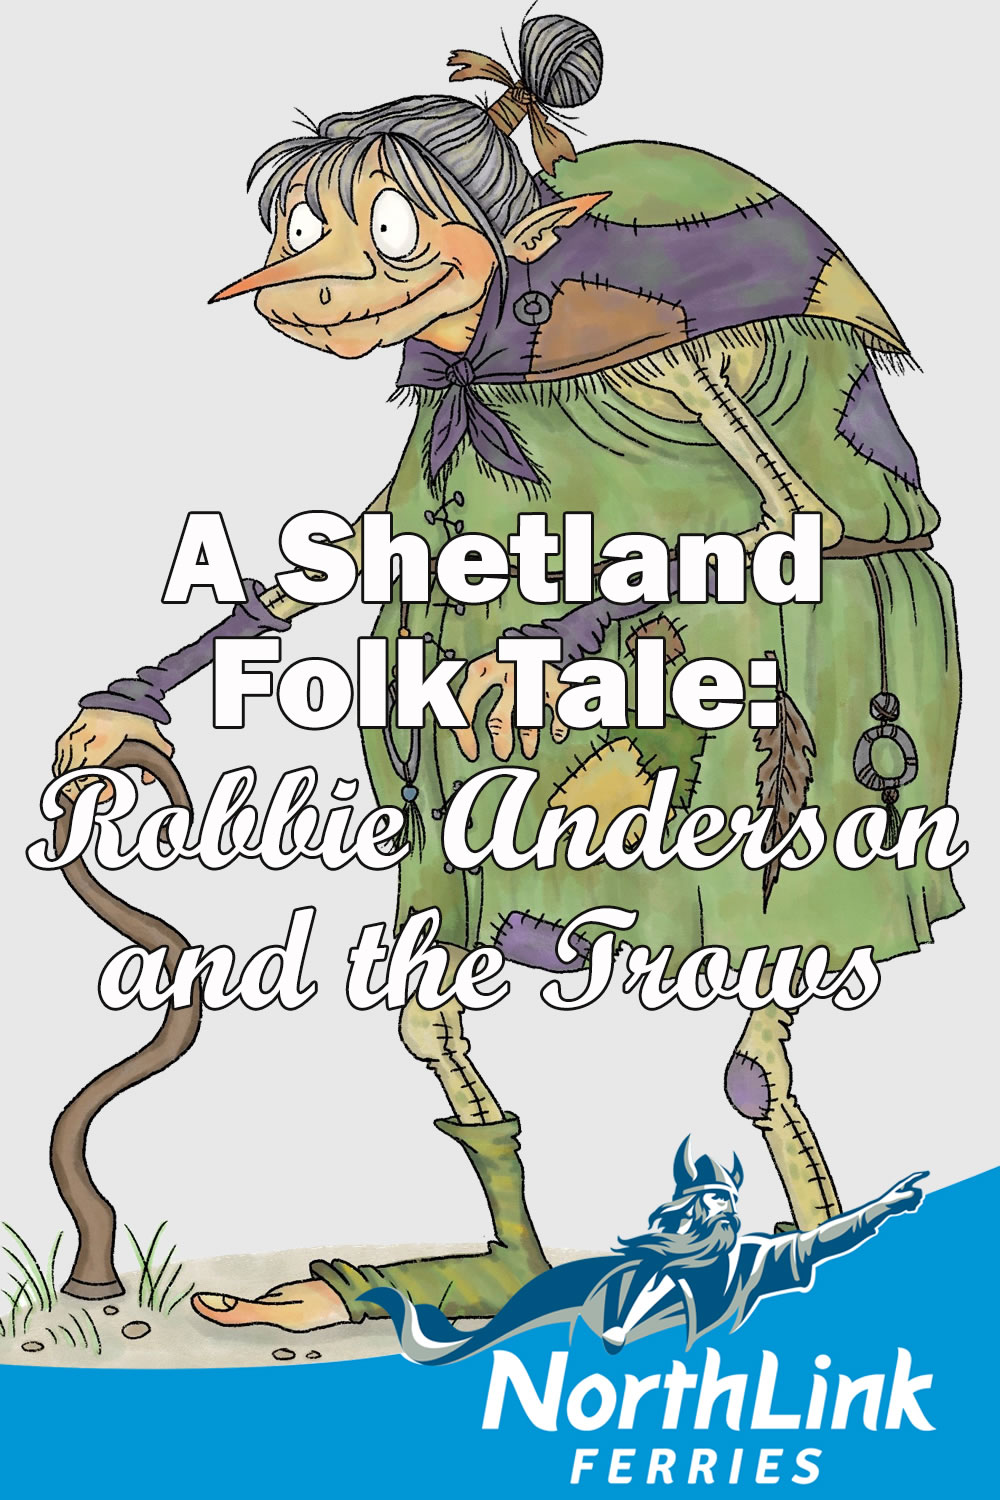 A Shetland Folk Tale: Robbie Anderson and the Trows